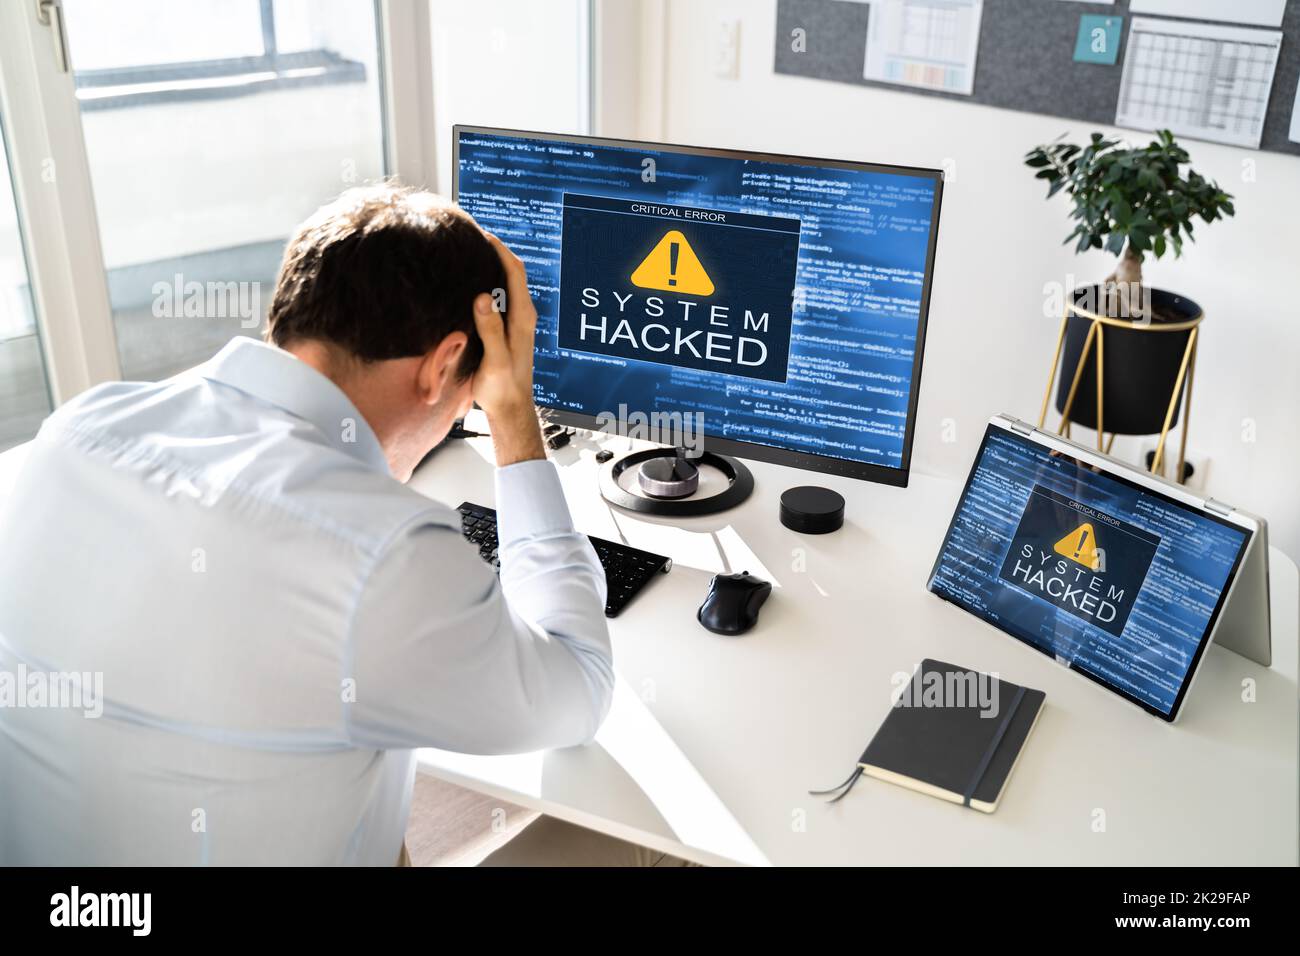 Computer System Hacked. Virus Software Screen Stock Photo